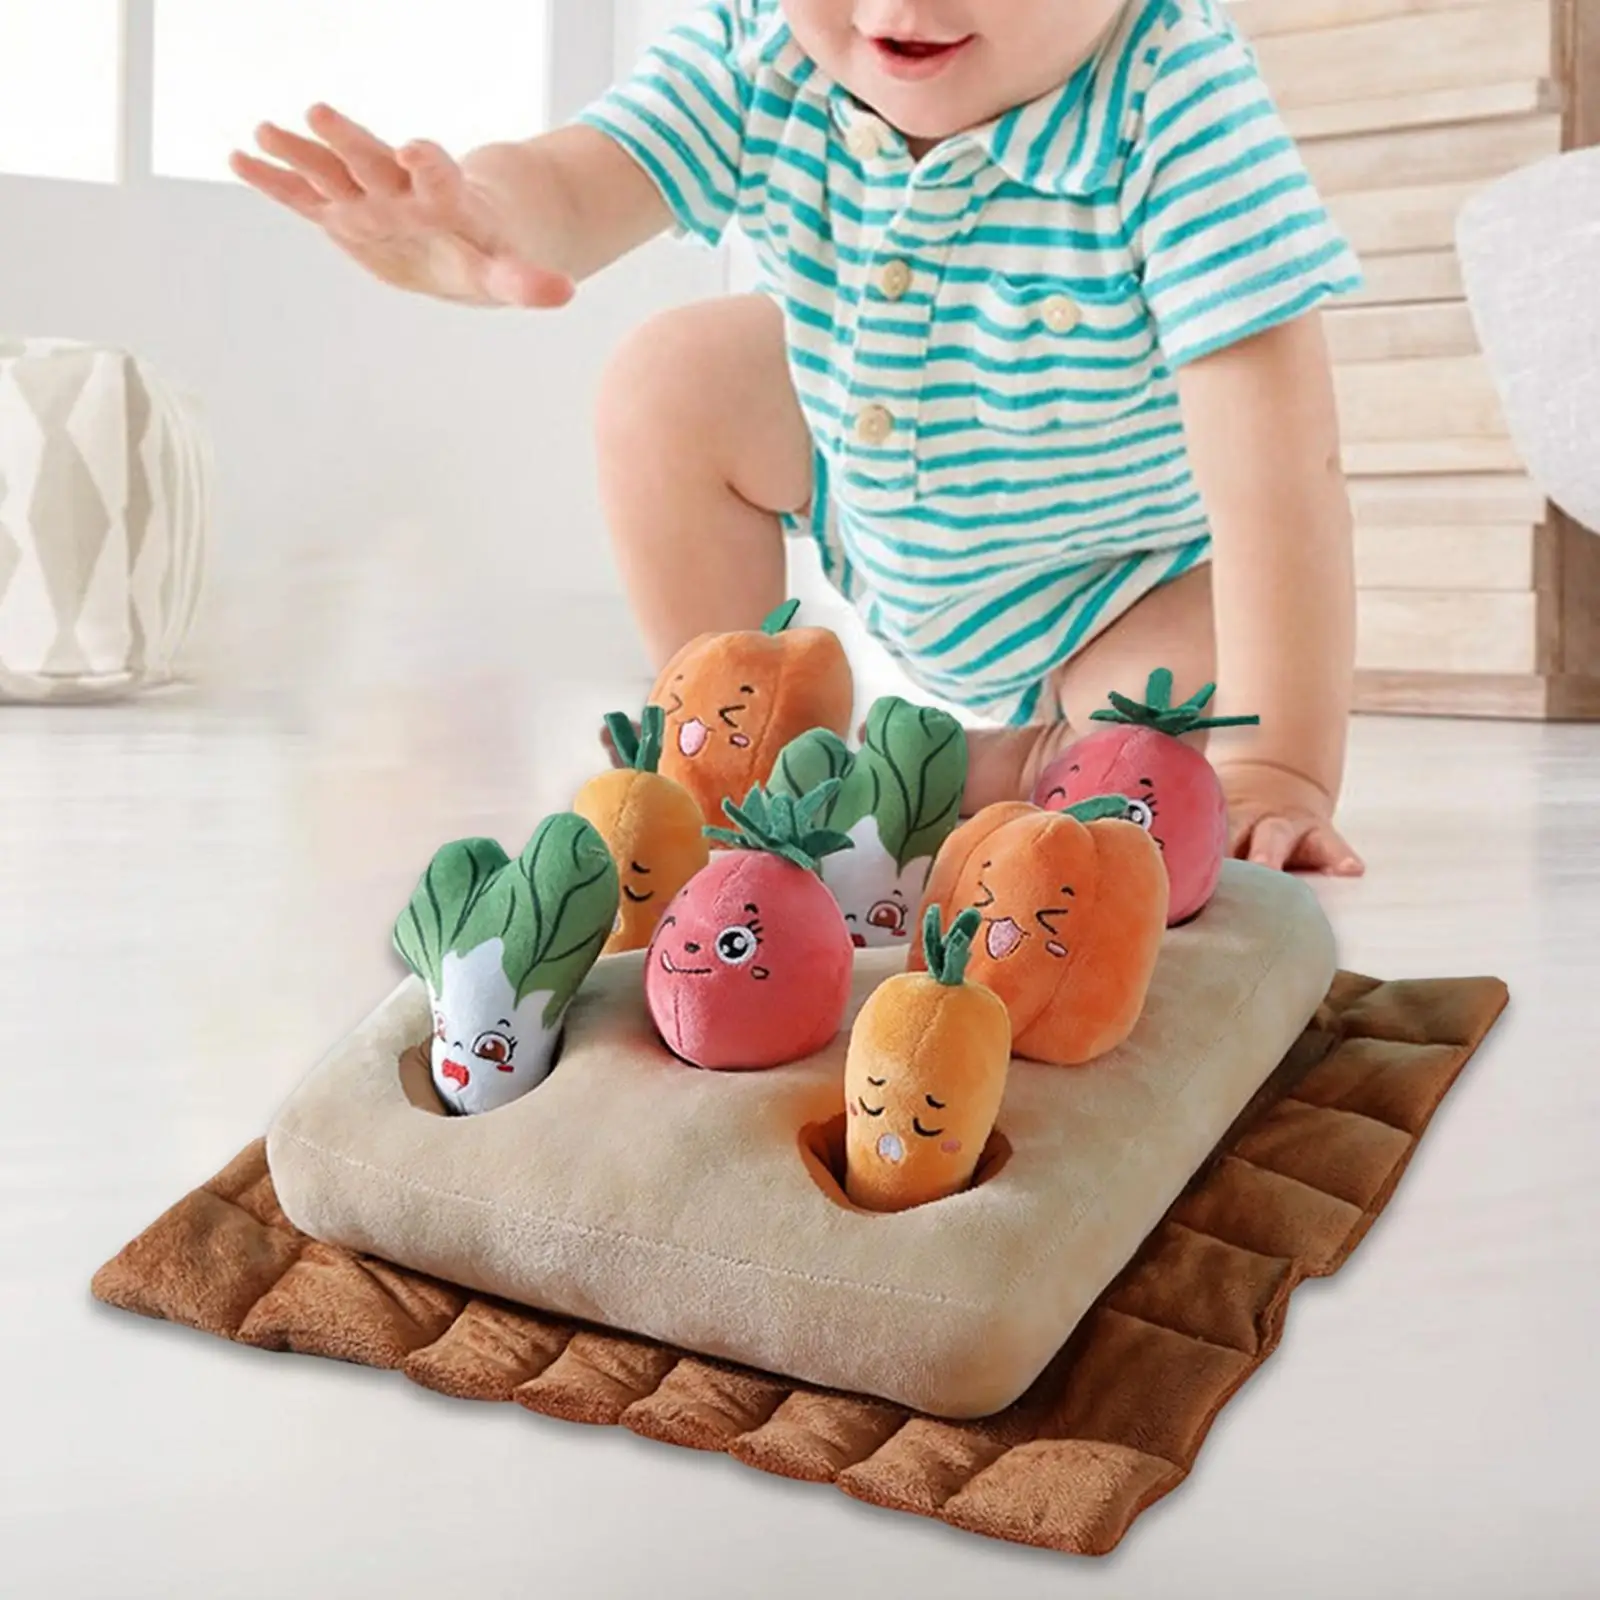 Toddlers Montessori Toys Vegetable Plush Toy for Toddlers Age 1-3 Accessory